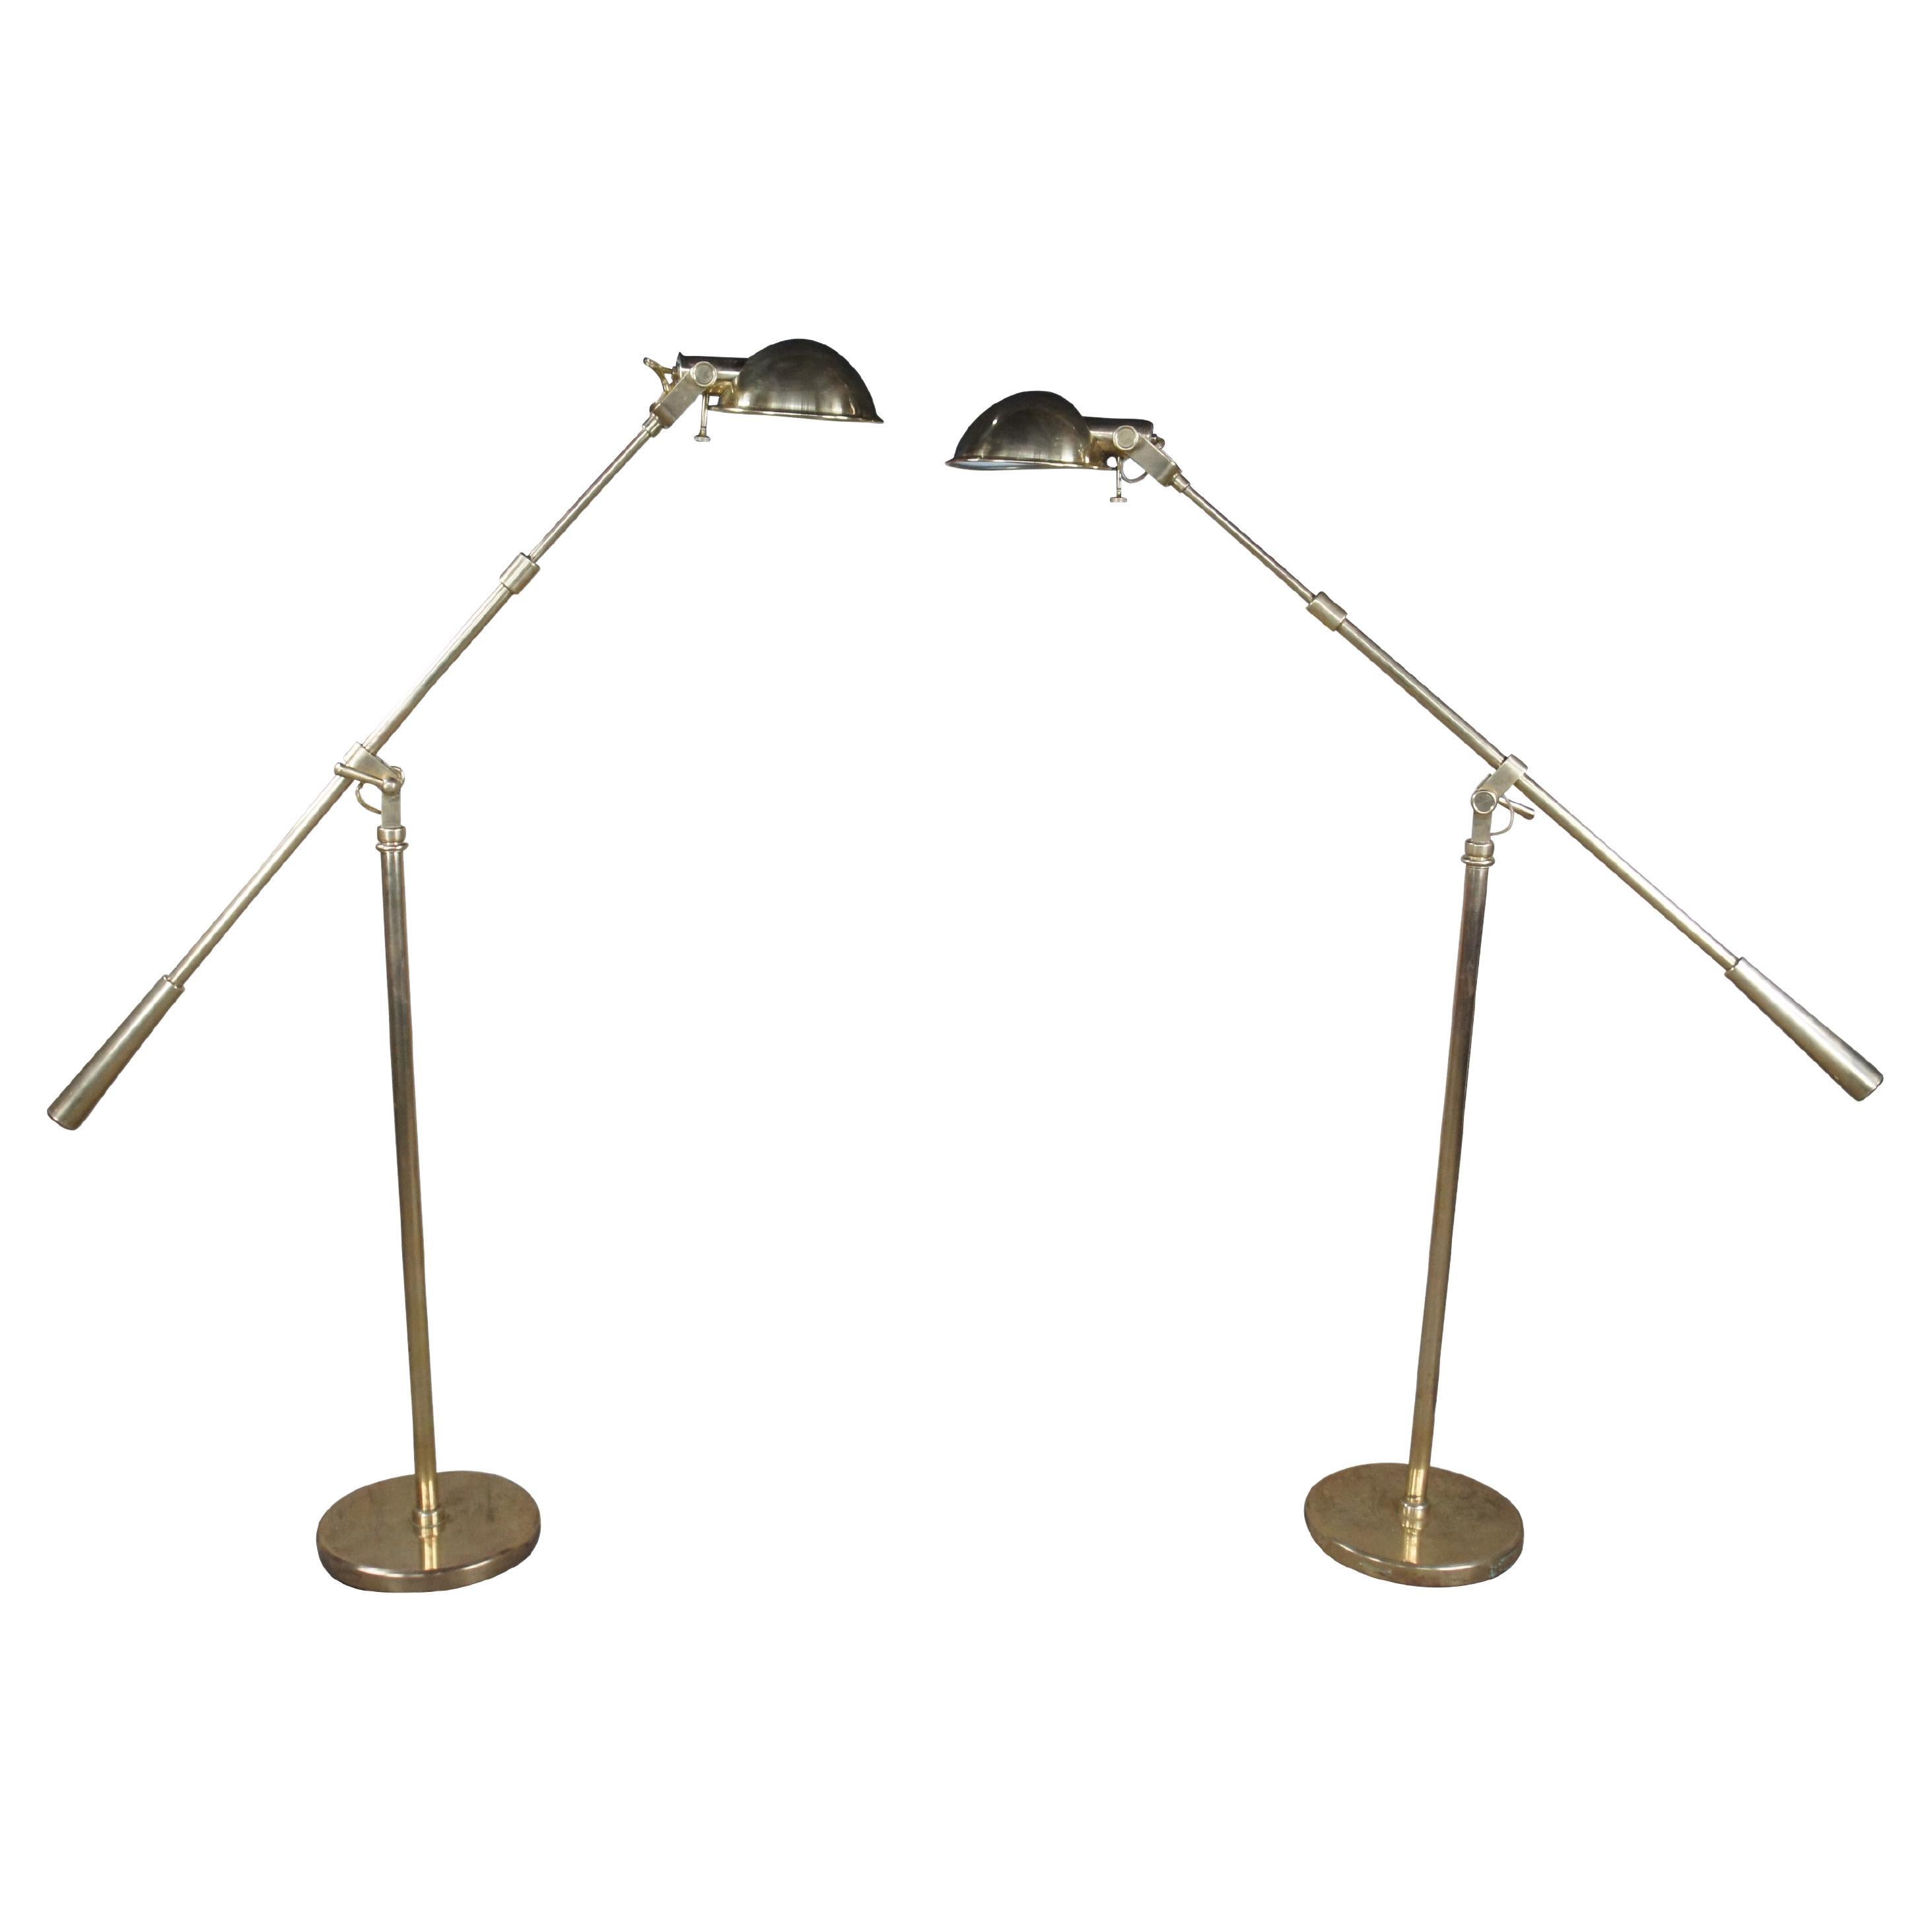 Pair of Ralph Lauren Home Boom Arm Pharmacy Lamps, circa 1990s. The design is based on early twentieth-century work lamps and includes knobs inspired by an antique watch. Exposed wire is reminiscent of antique lighting. Height is